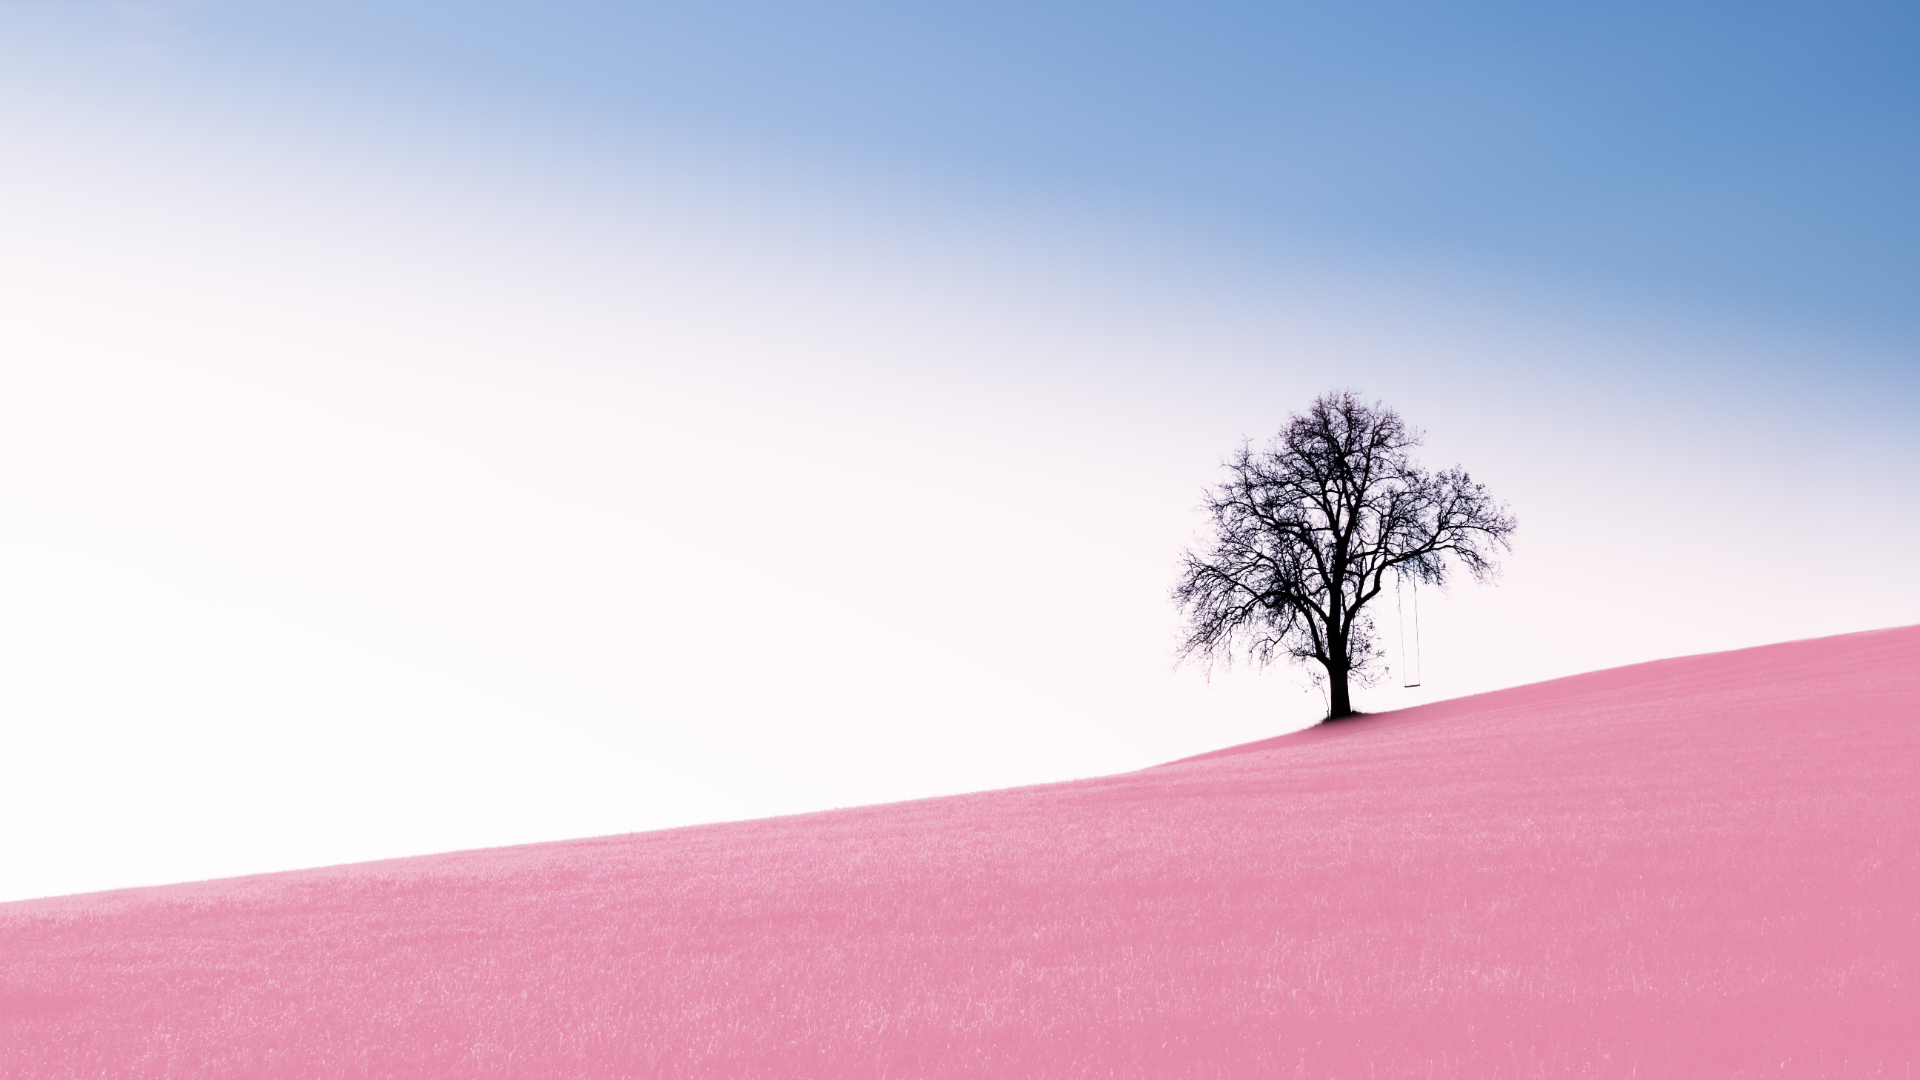 General 1920x1080 nature landscape trees grass sky clear sky selective coloring pink